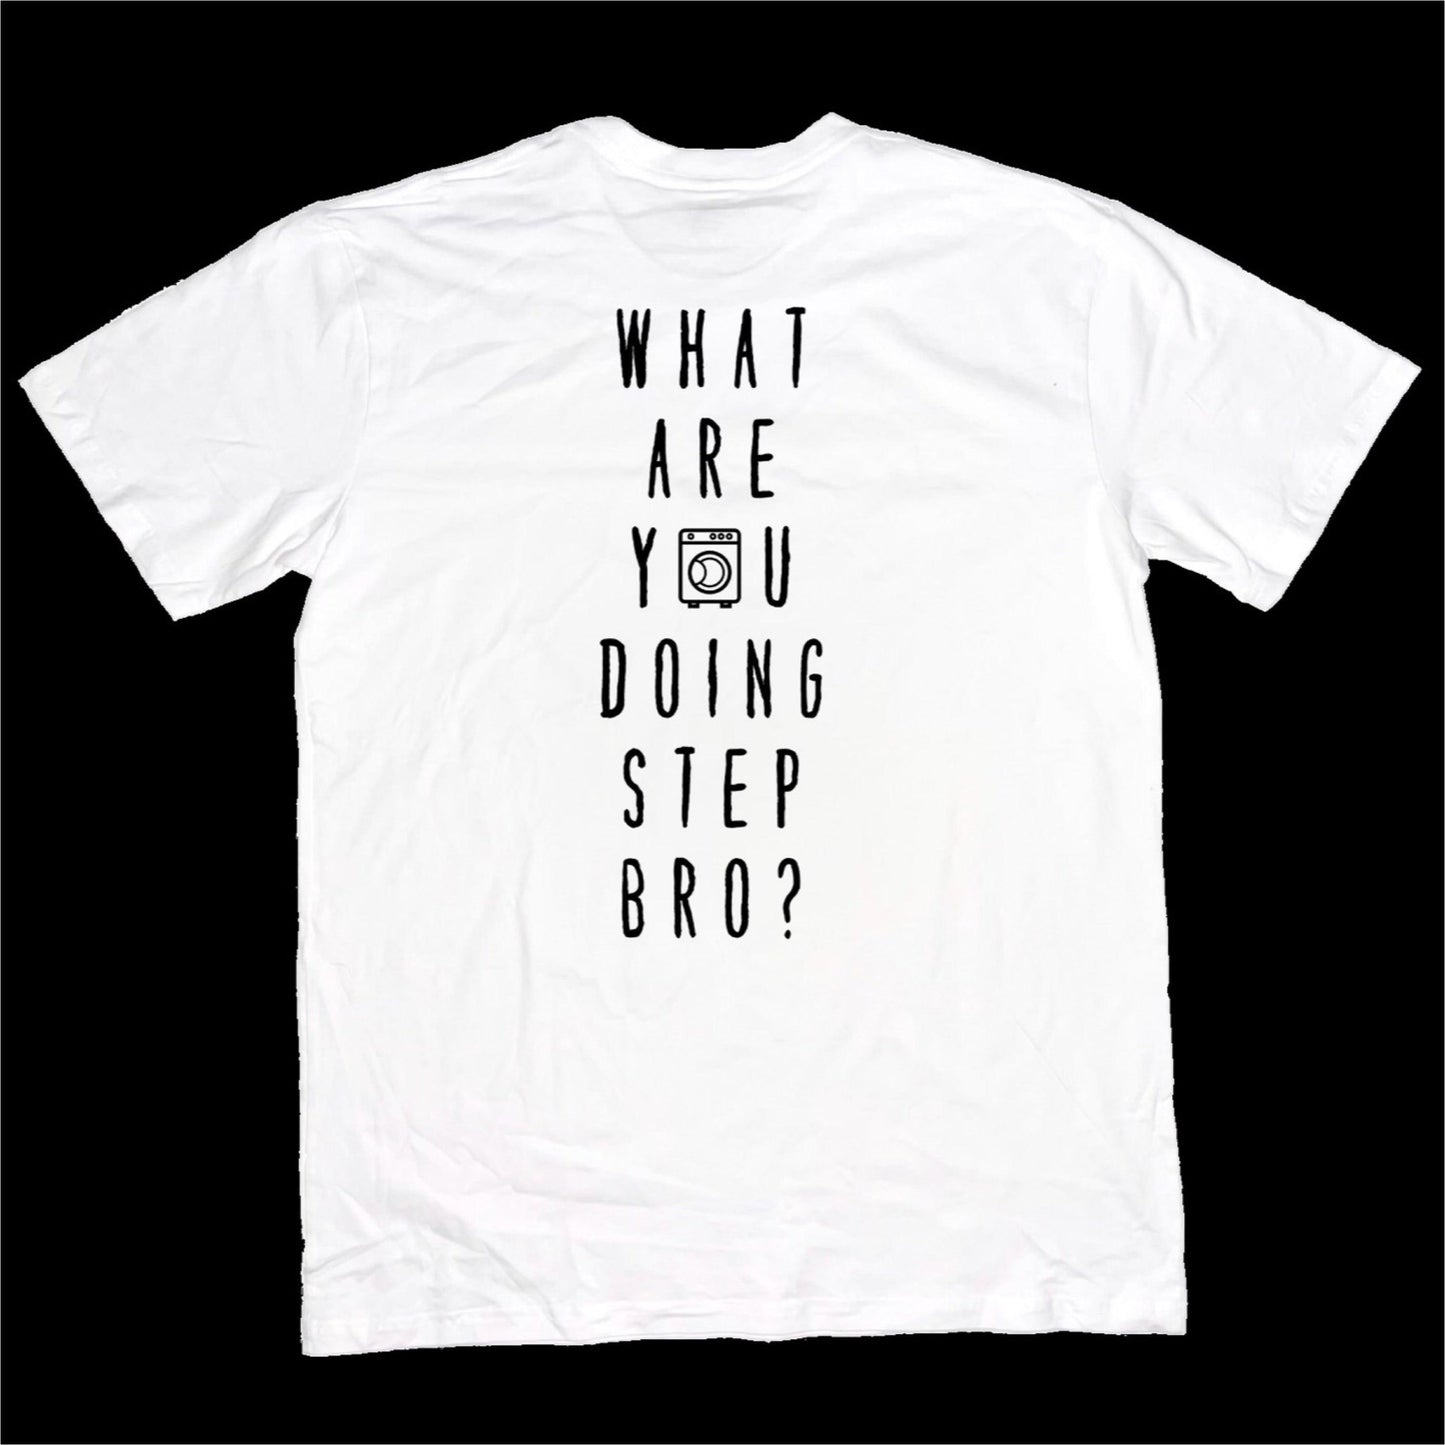 what are you doing step bro? [t-shirt] - ovrsze